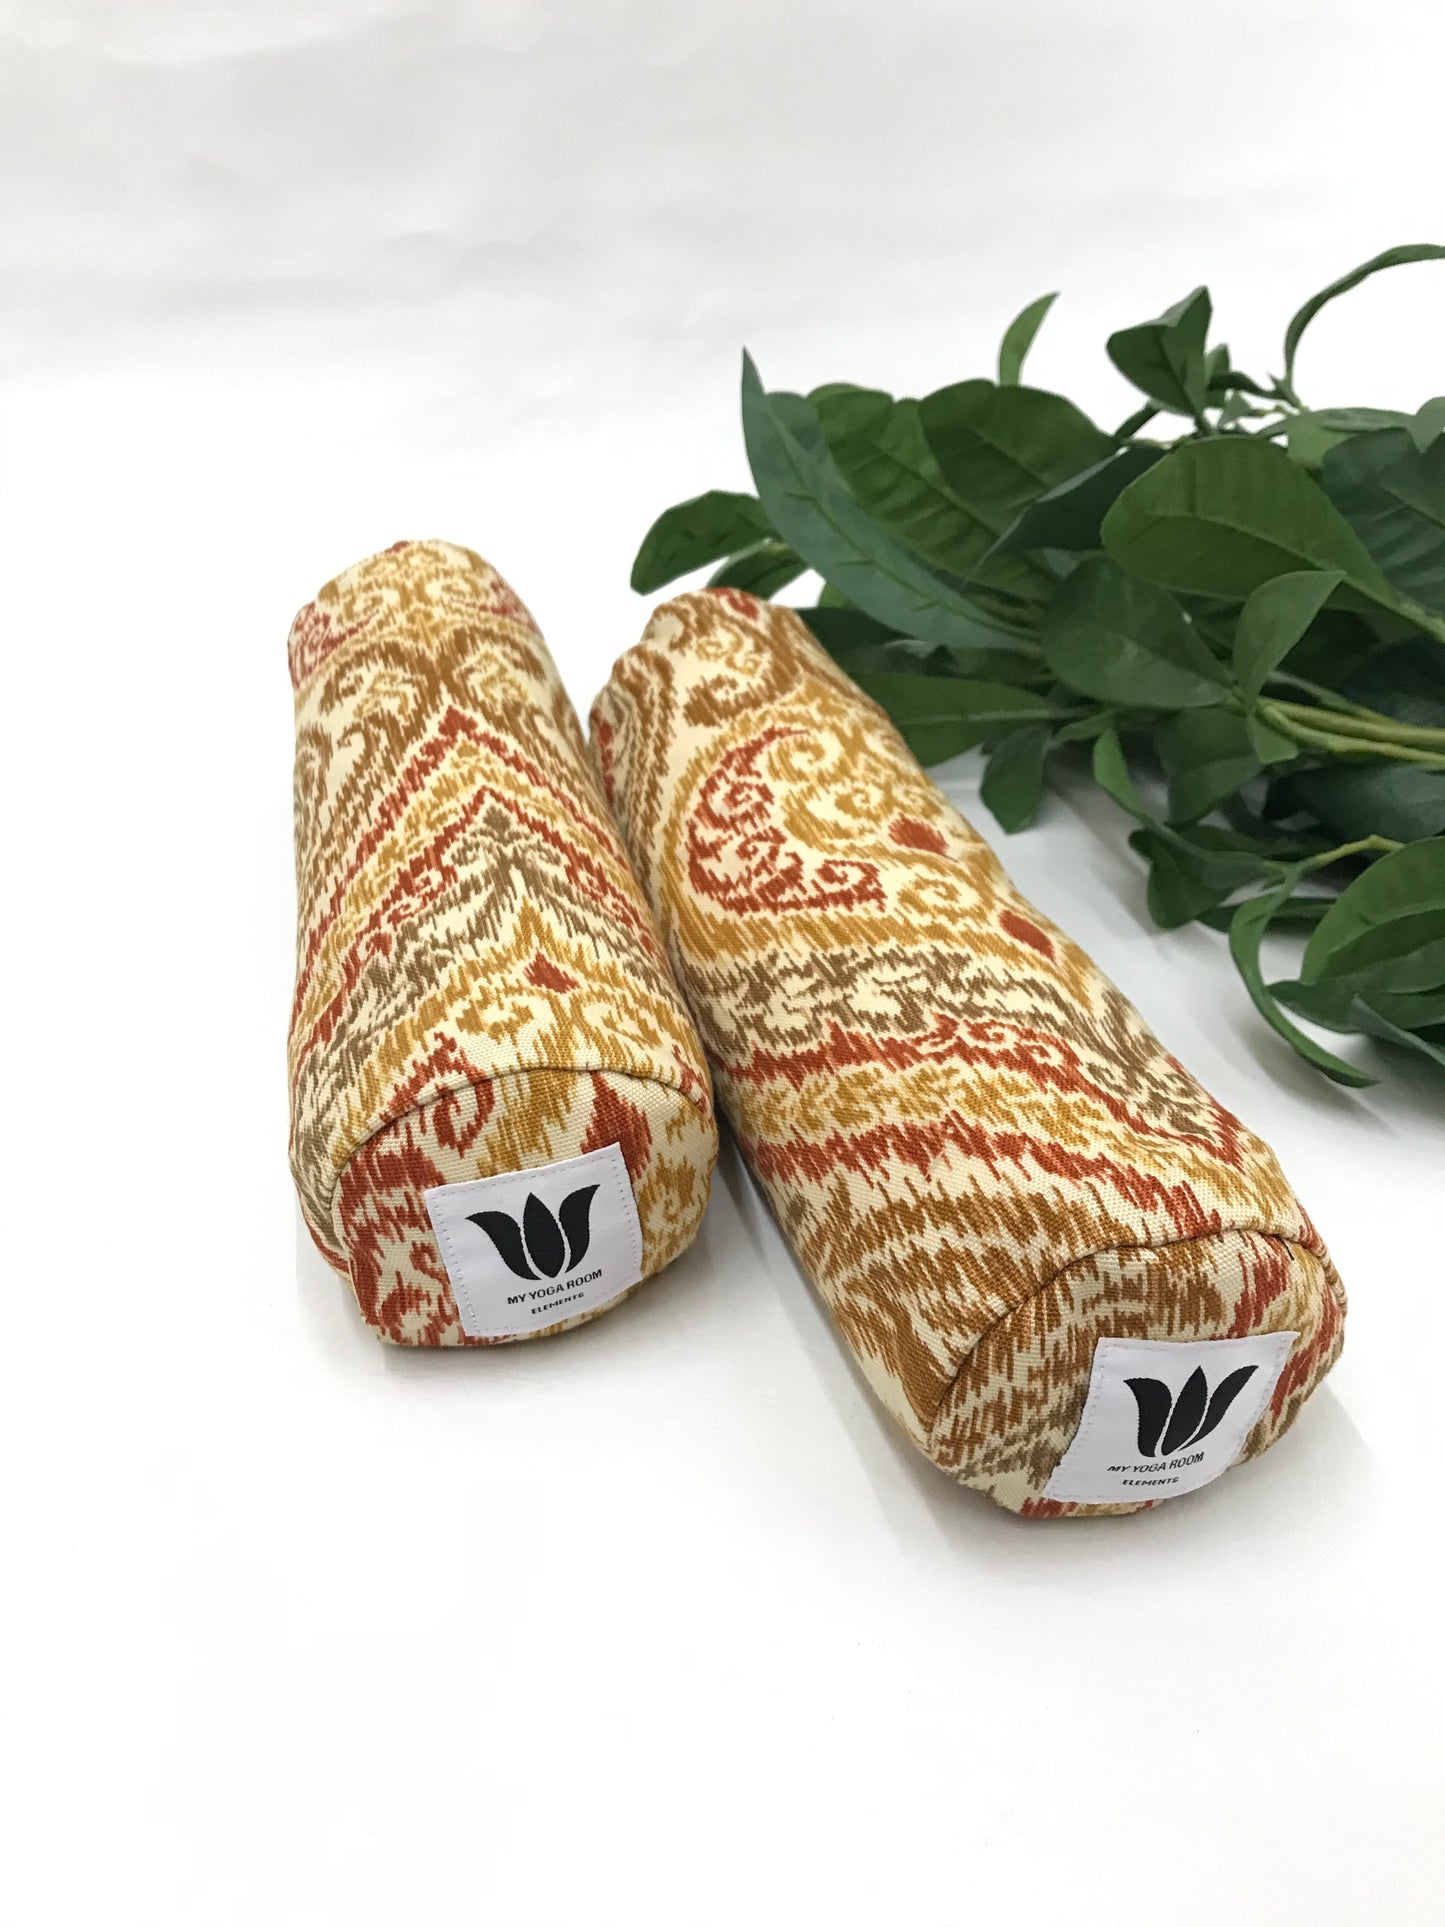 Mini yoga bolster in durable fabric, red gold beige damask print fabric. Cushion and support the body in the practice of yoga and meditation.Removeable cover. Made in Canada by My Yoga Room Elements